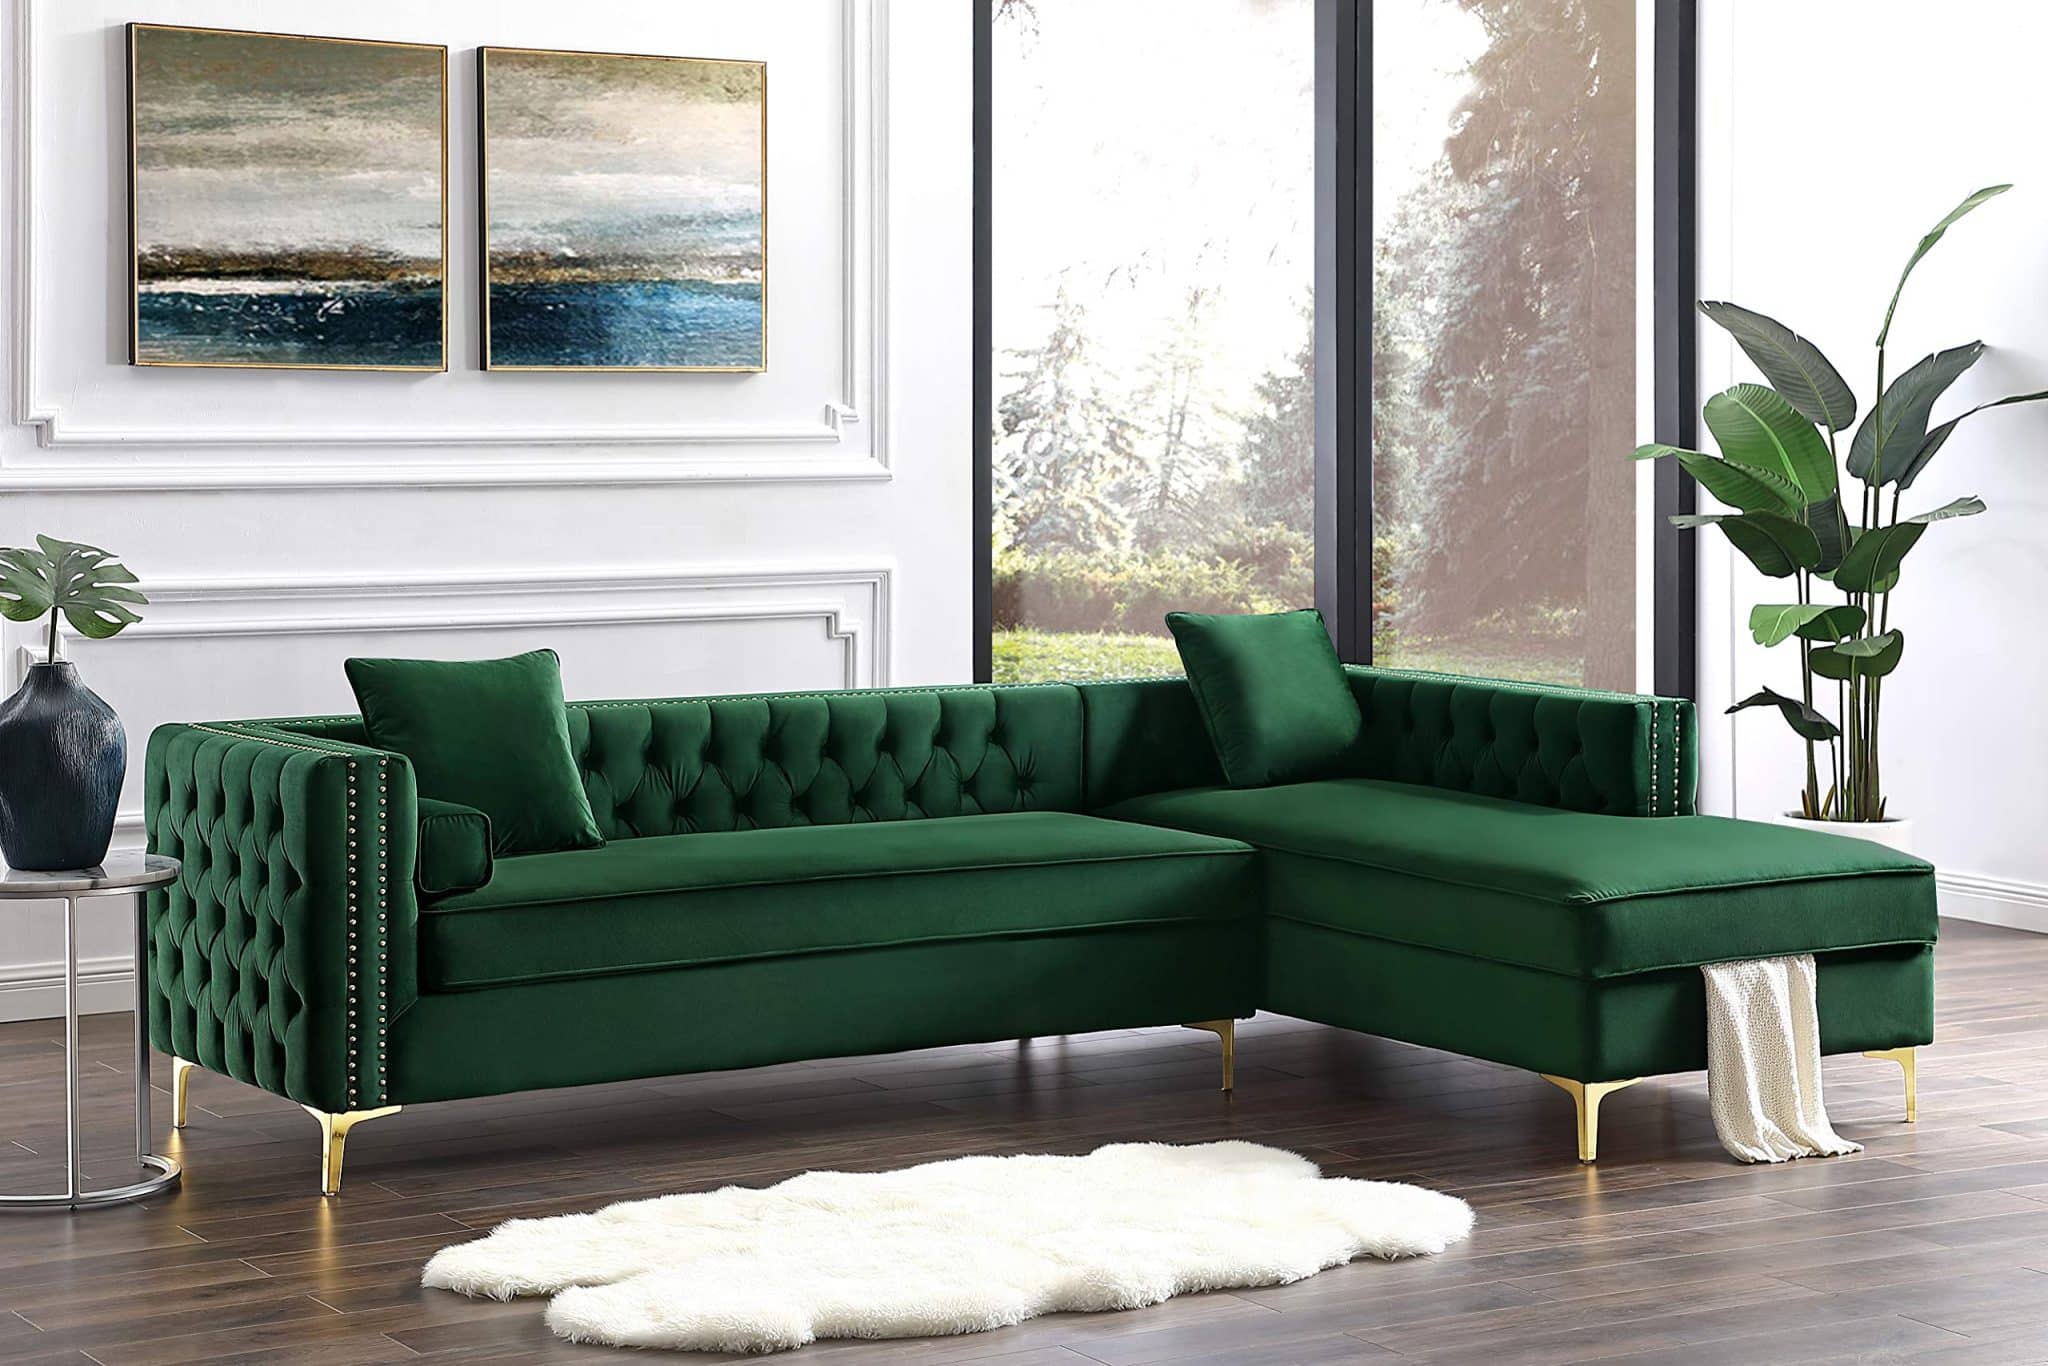 Best Green Sectional Sofas to Brighten Up Your Living Room